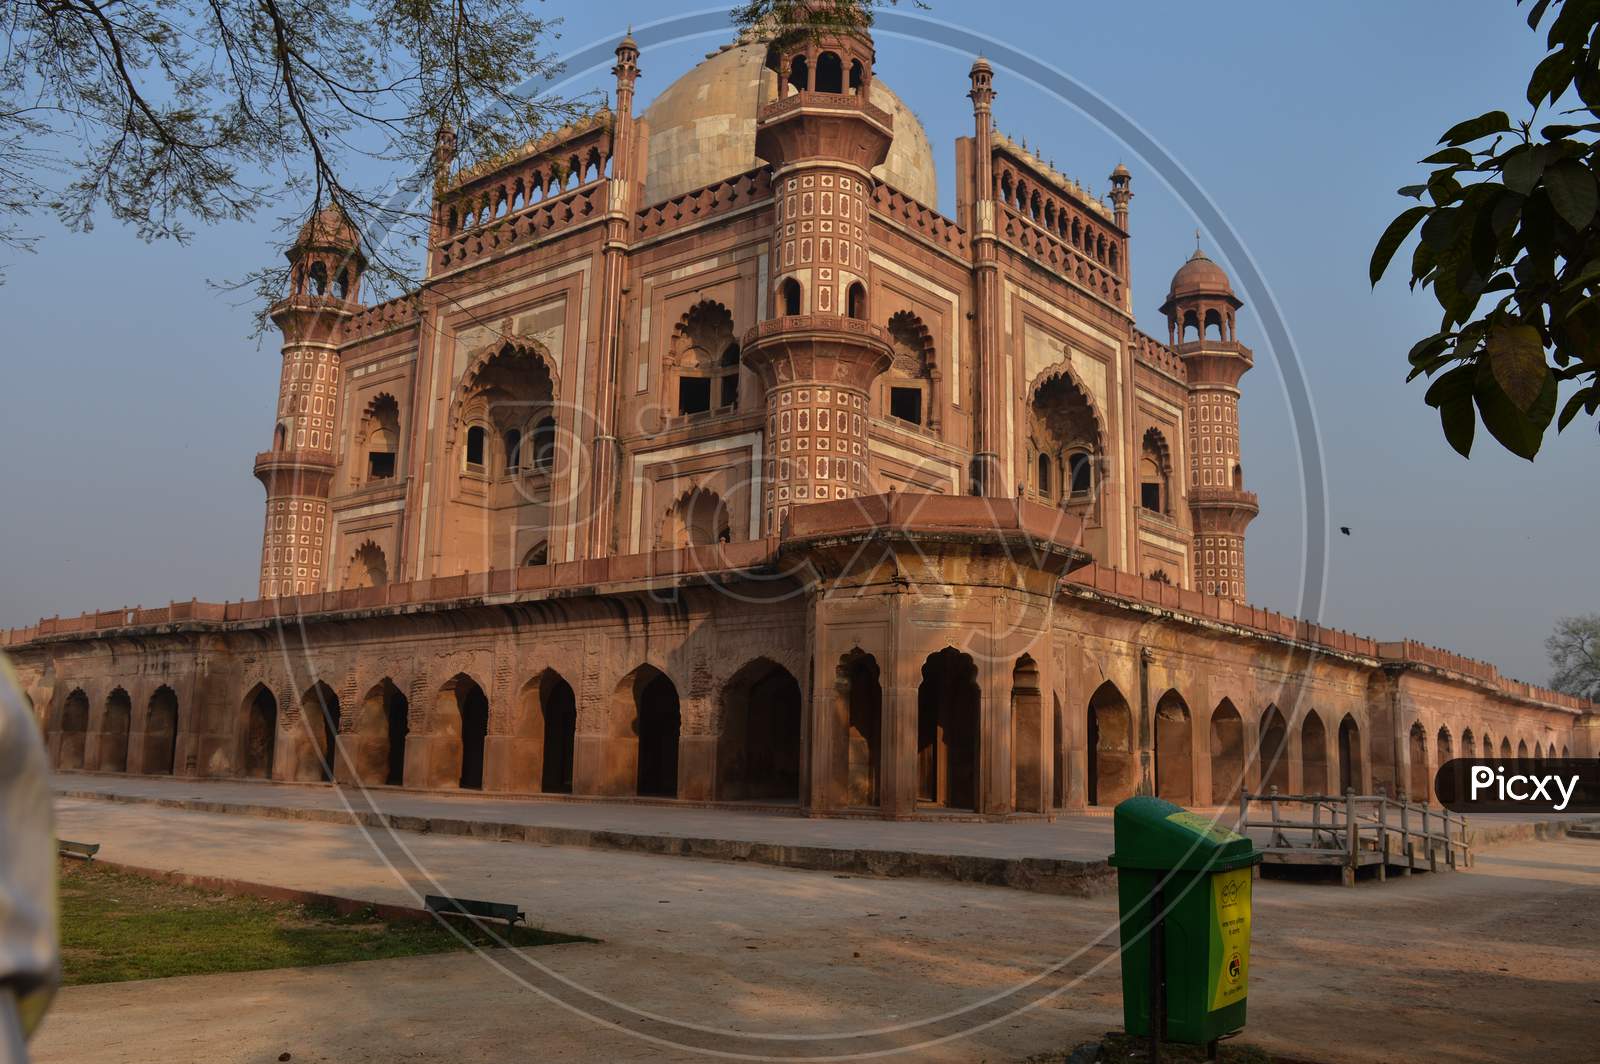 A Mesmerizing View Of Safdarjung Tomb Memorial And Dustbin From The Side Of Lawn At Winter Morning.